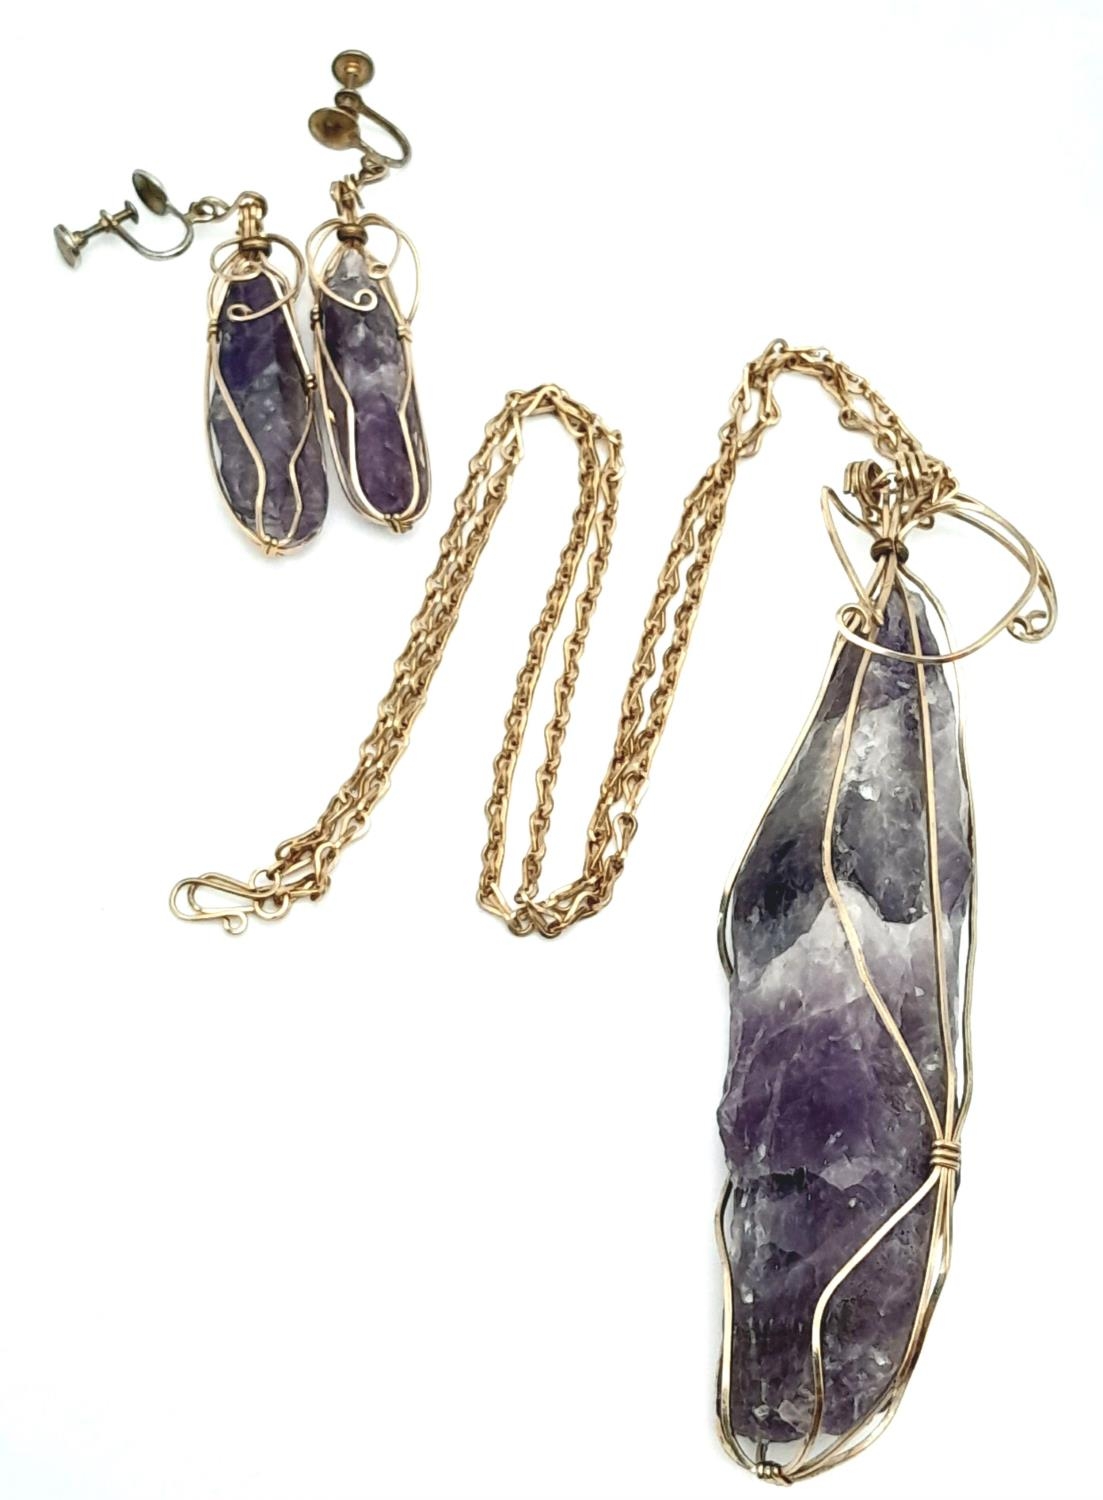 A Yellow metal amethyst geode large wire caged necklace with matching earrings with non-pierced